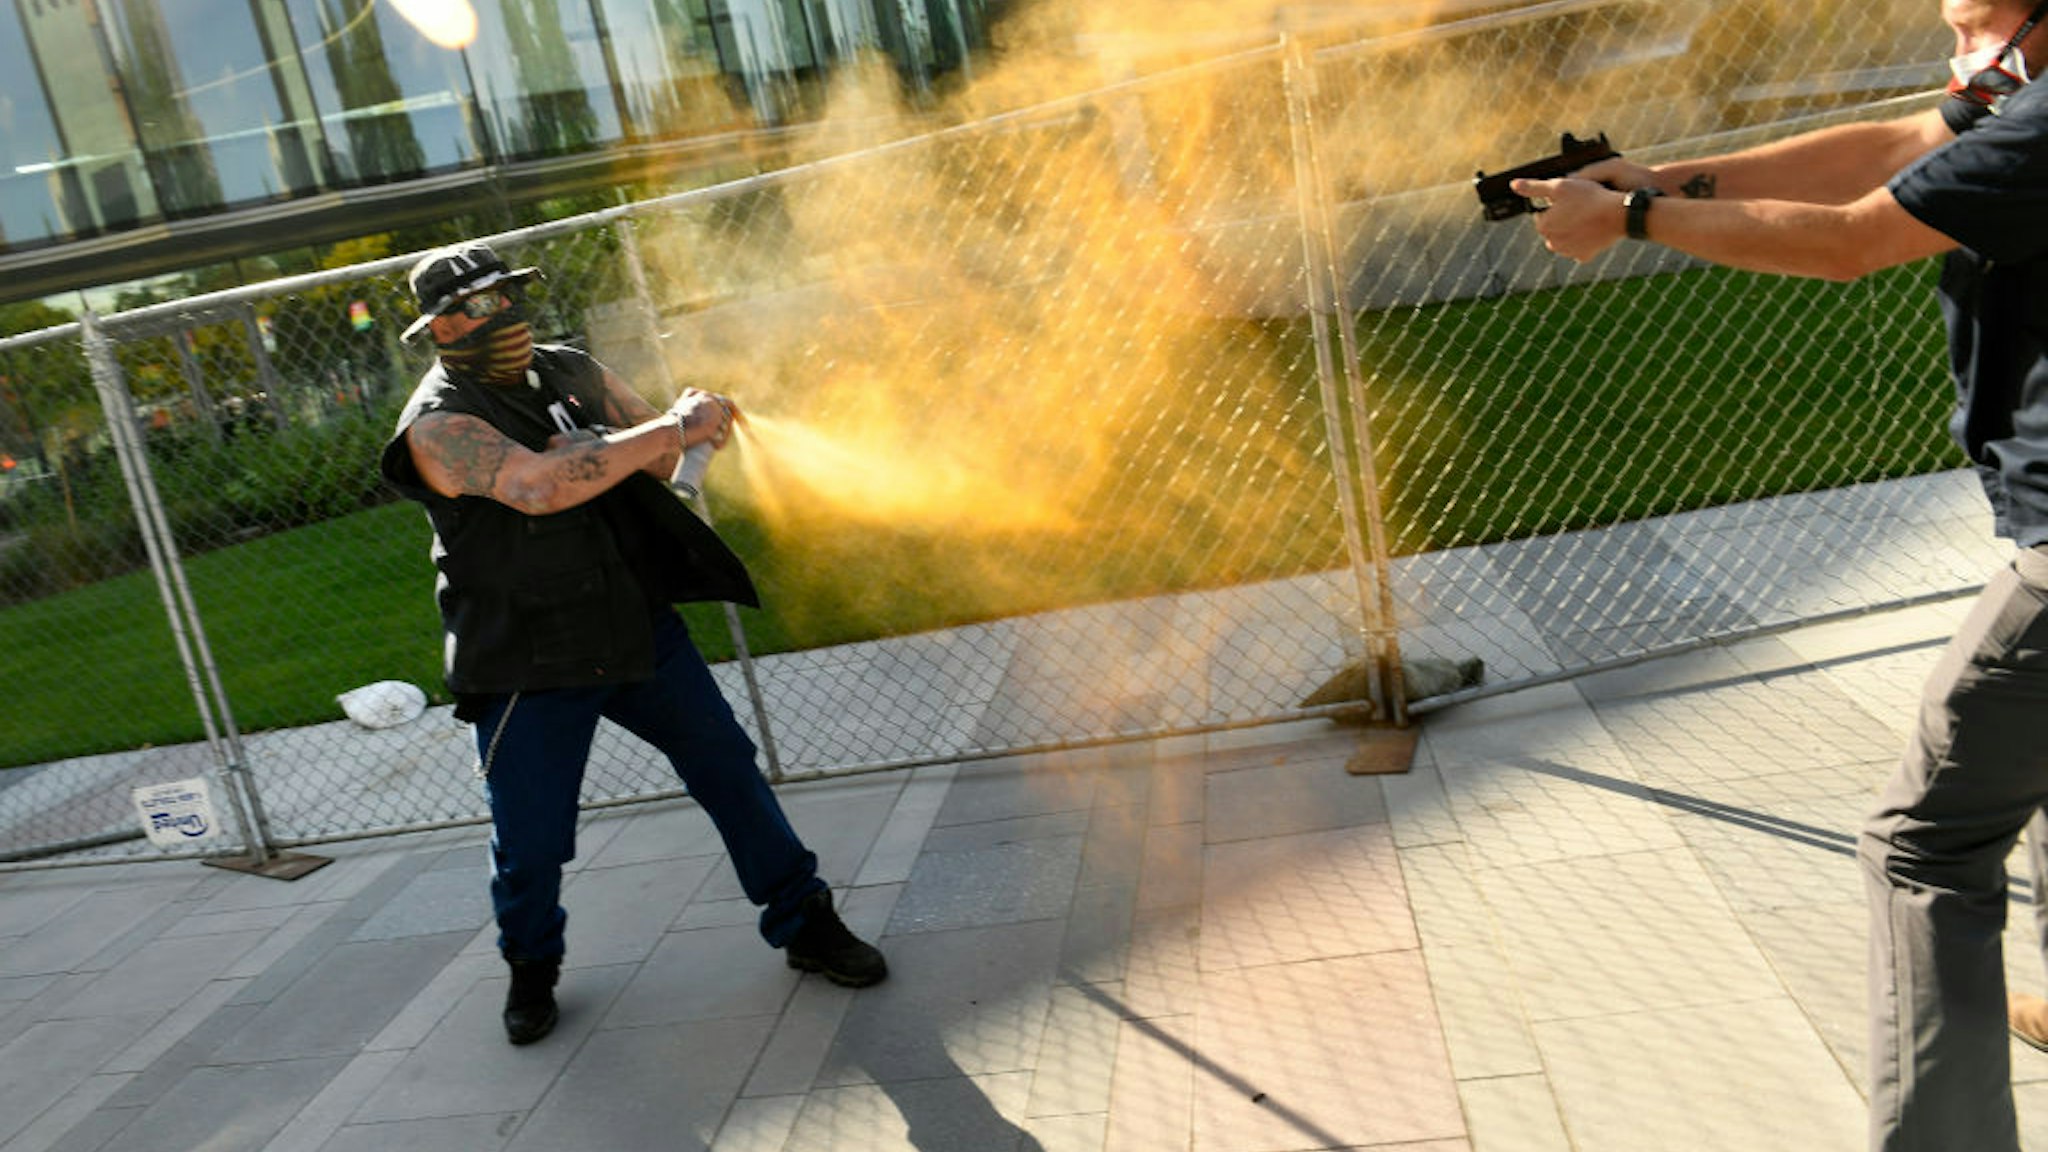 DENVER, COLORADO - OCTOBER 10: Two men clash after dueling rallies in Downtown Denver on October 10, 2020 in Denver, Colorado. The man on the left side of the photo sprays what appears to be pepper spray at the man on the right side of the image. The man at right, fires his gun at the protester at left. The shooting happened as opposing rallies by far-right and far-left activists were ending. The shooter has been identified as Matthew Dolloff. He is being held for investigation of First Degree Murder in connection with this shooting. (Photo by Helen H. Richardson/MediaNews Group/The Denver Post via Getty Images)